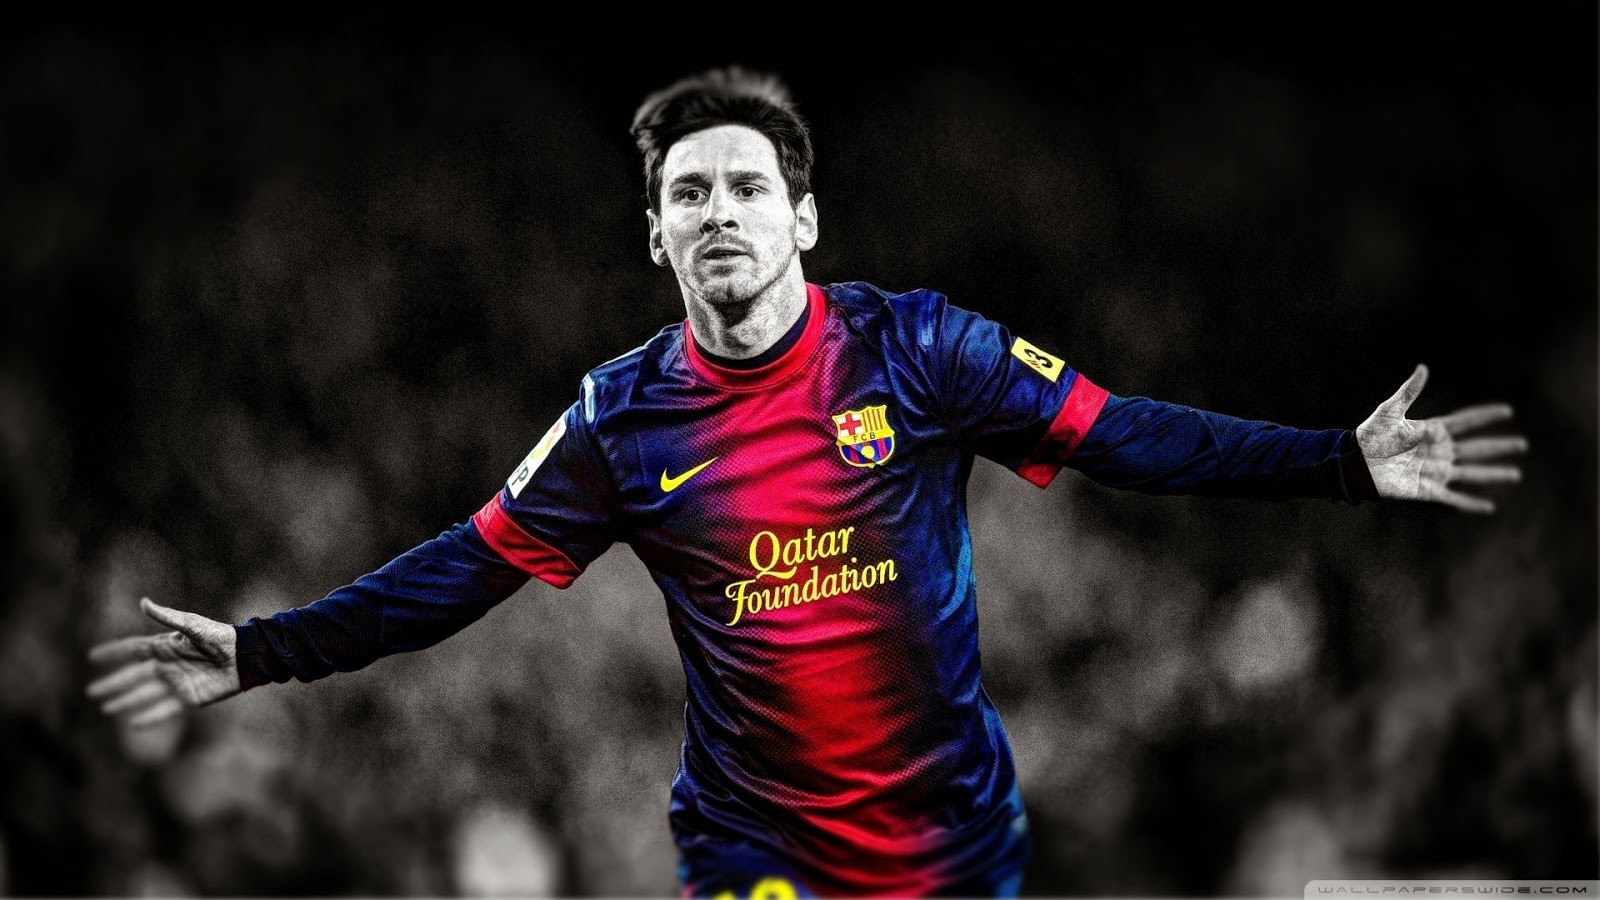 lionel2Bmessi2Bwallpaper Top Lionel Messi Wallpapers